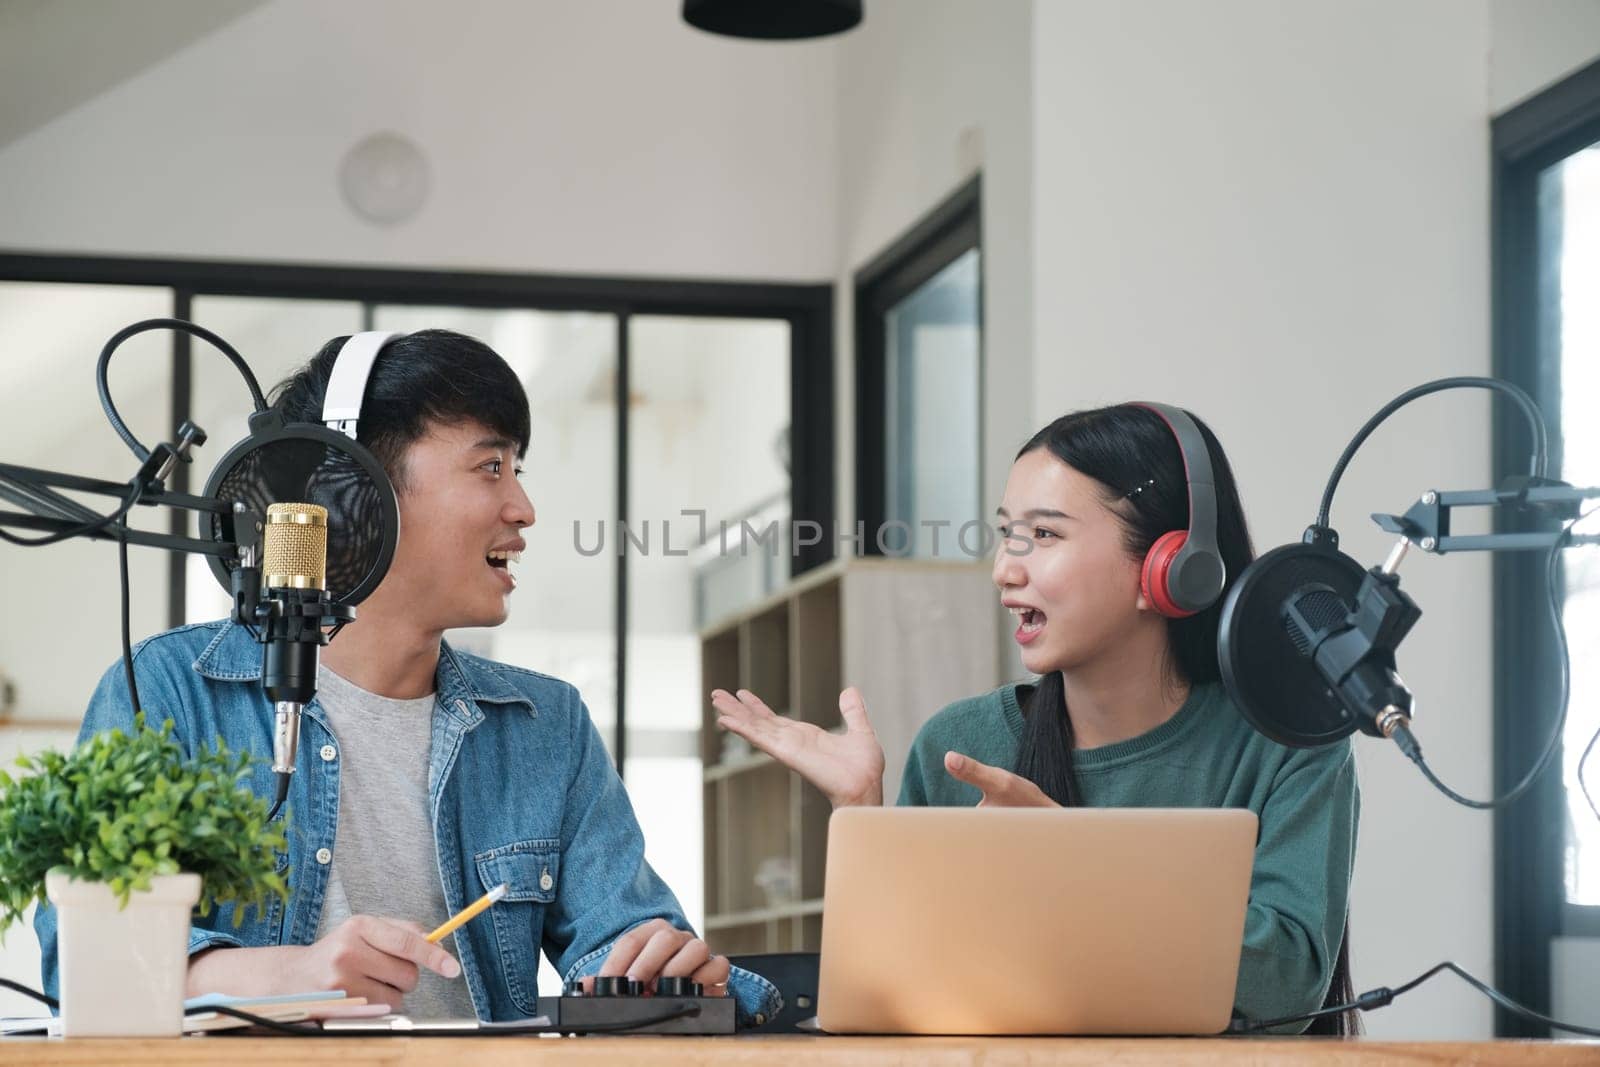 Two people are talking on a microphone. One of them is wearing headphones. The other person is wearing a green shirt